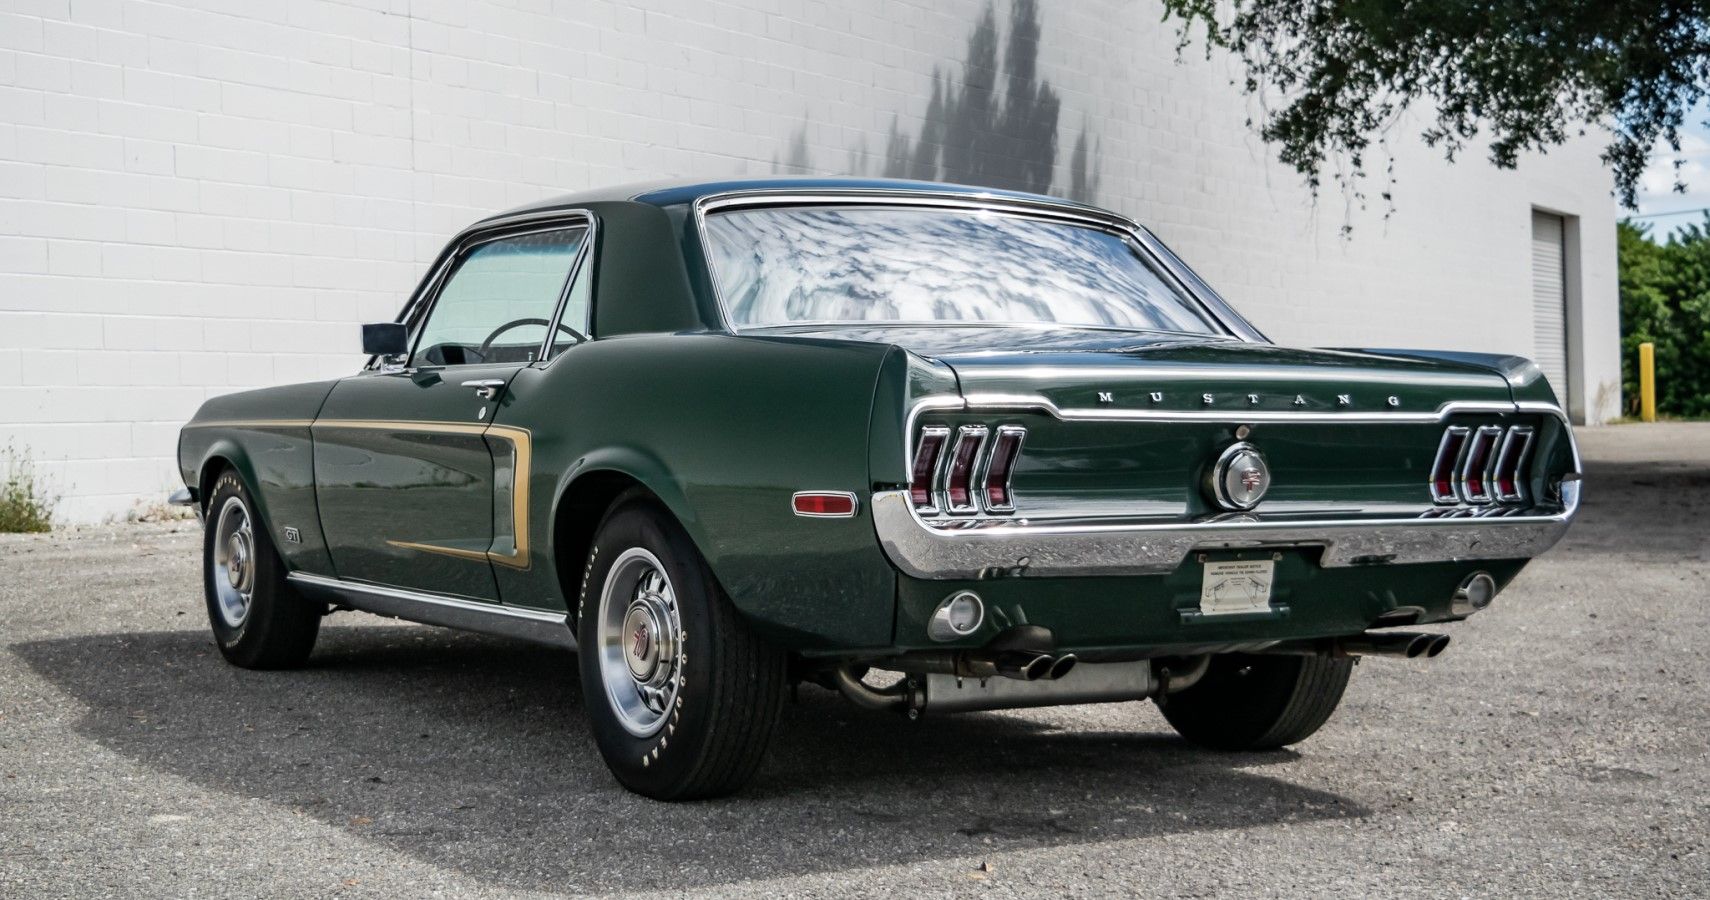 1968 Ford Mustang GT Coupe 428 Cobra Jet rear view